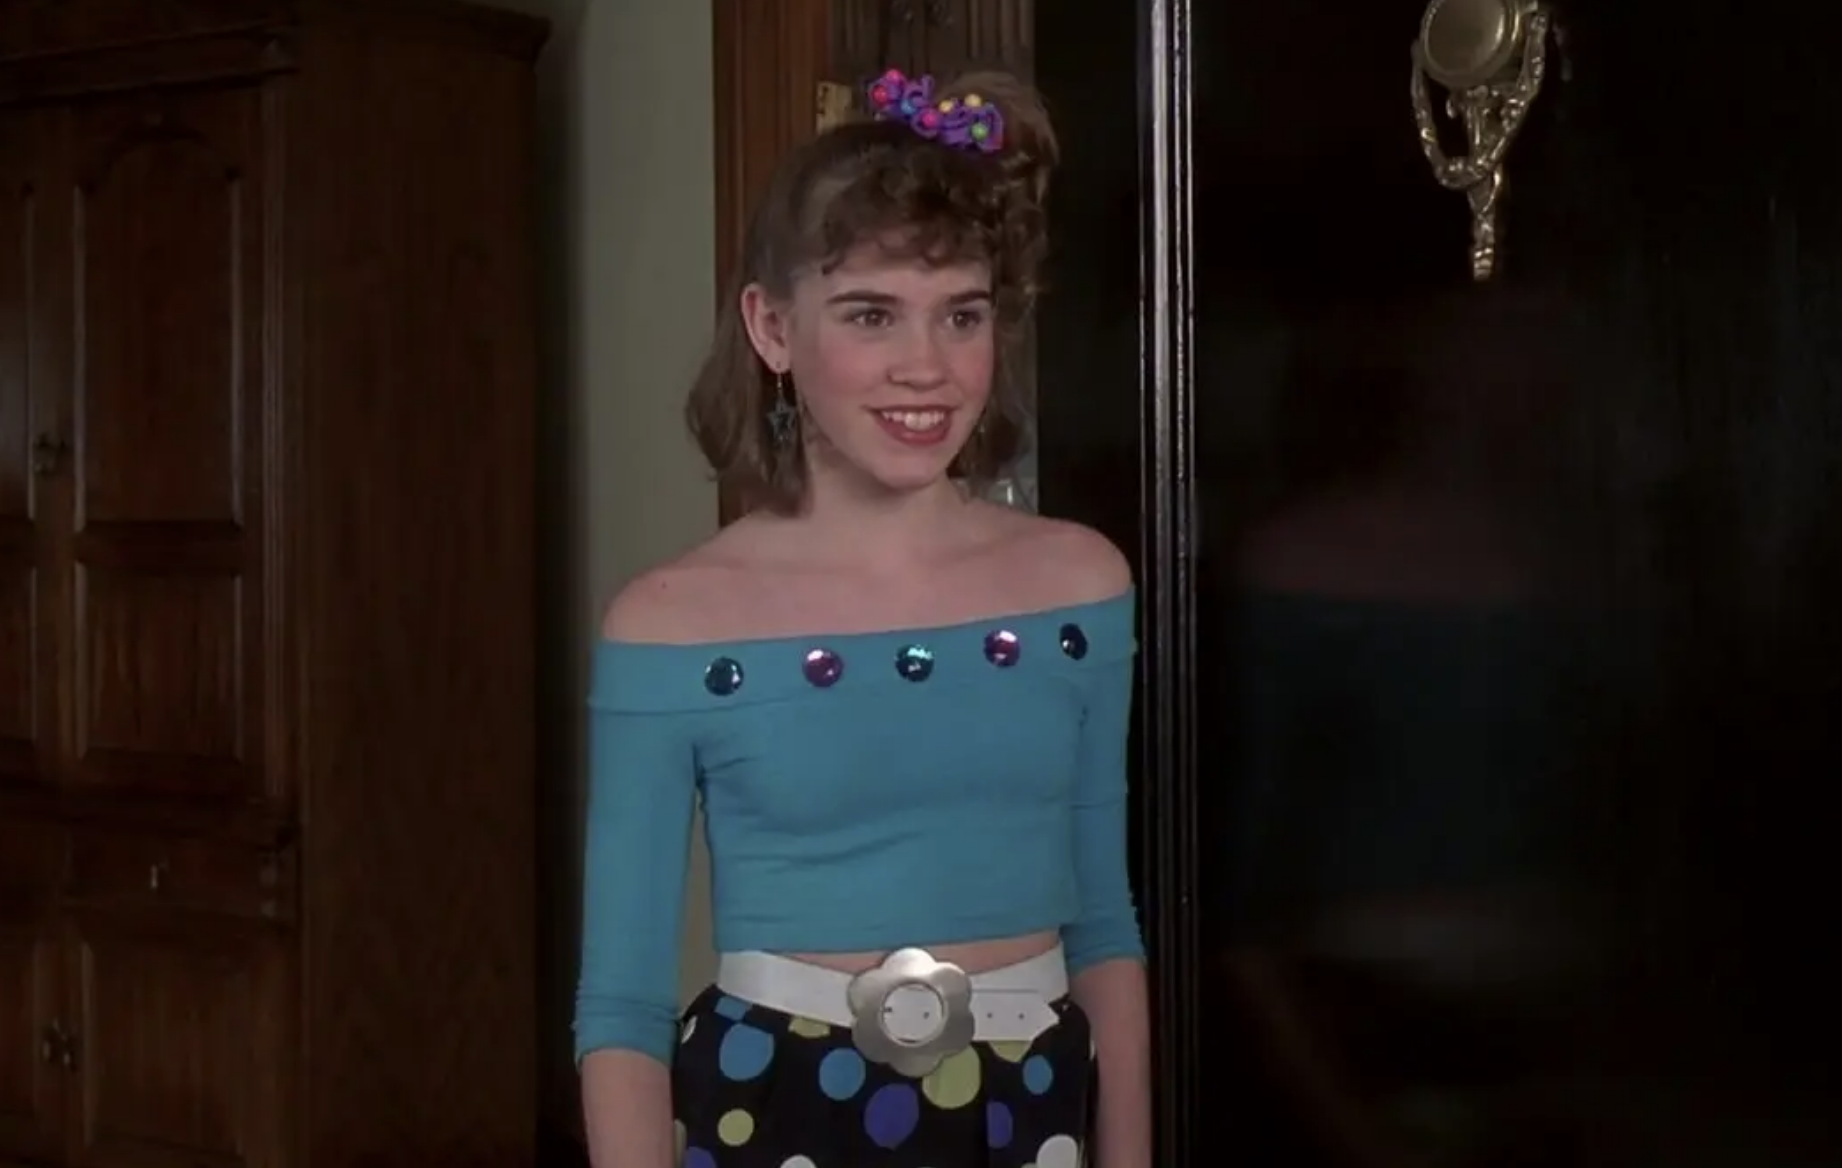 Christa wearing an off the shoulder &#x27;80s outfit with hair in a side pony